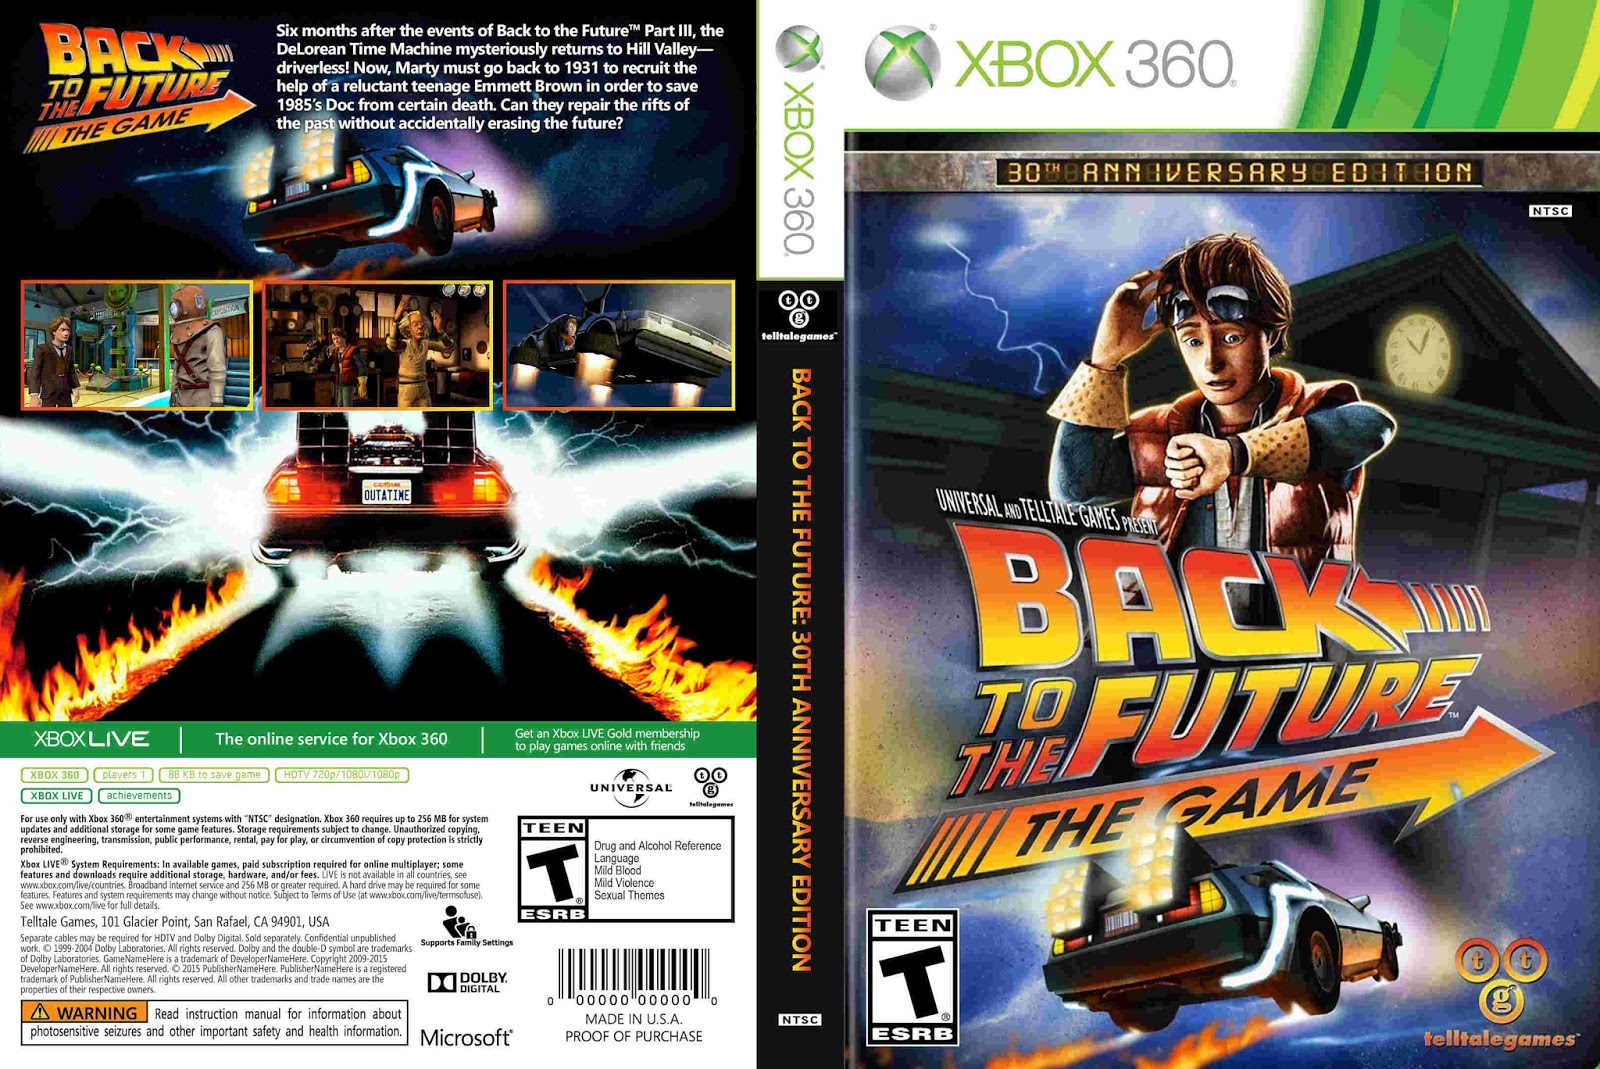 Back 2 game. Назад в будущее на Xbox 360. Back to the Future the game (30th Anniversary Edition). Xbox 360 back. Back to the Future the game Xbox 360.